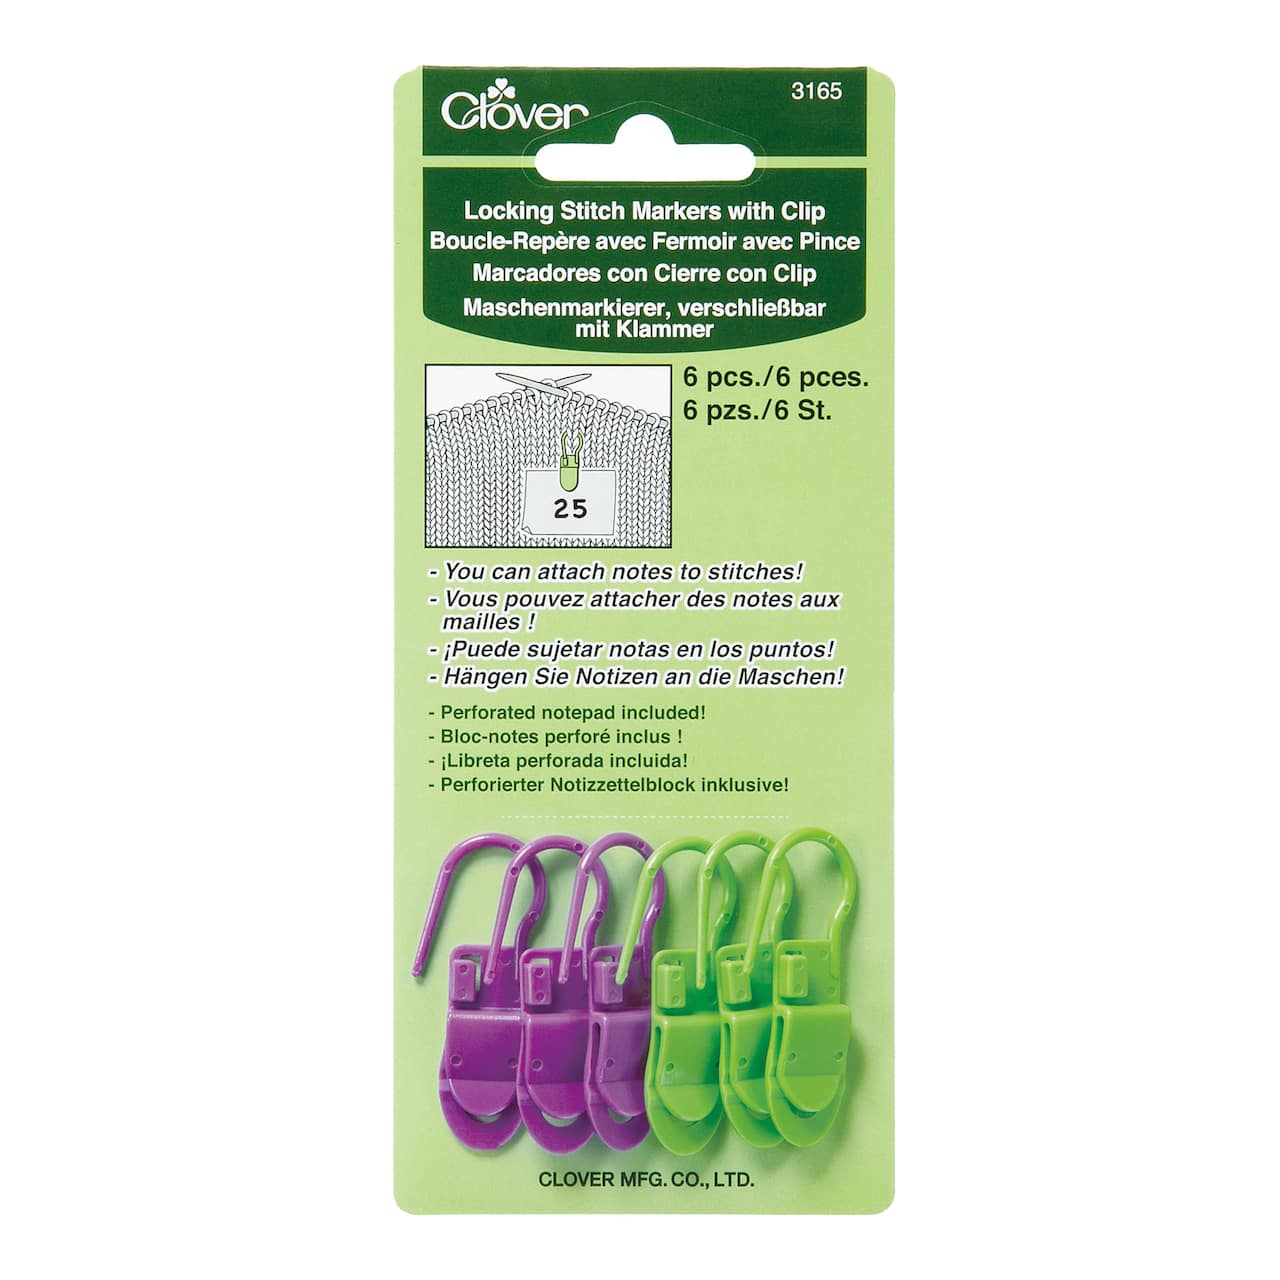 Clover Locking Stitch Markers with Clip